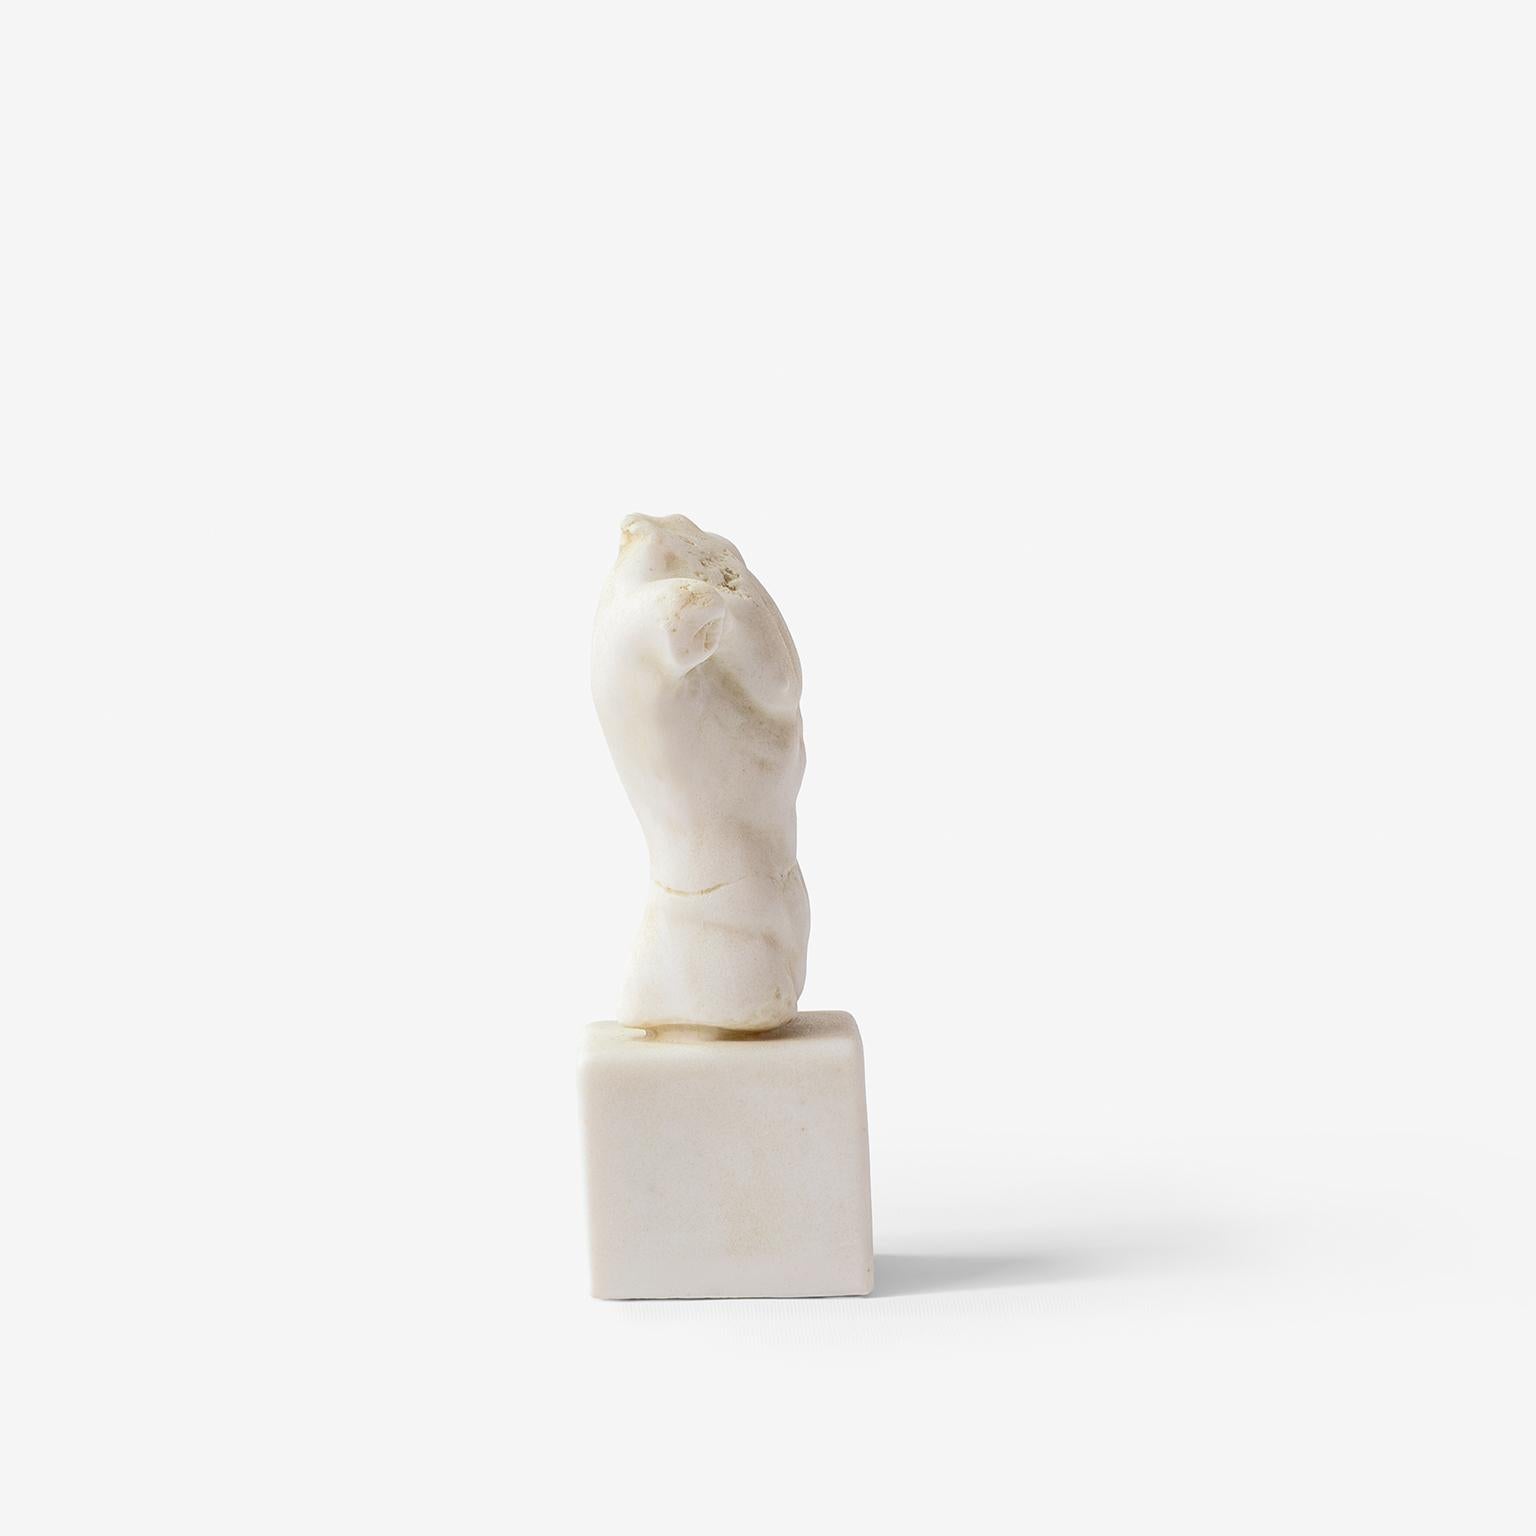 Height: 5.9'' / Weight: 800 gr (for each item)

The set concerns 1 female, 1 male torso. This is a work that symbolizes the depiction of the ideal male and female form.

-Produced from pressed marble powder.
-Produced from the original molds of the